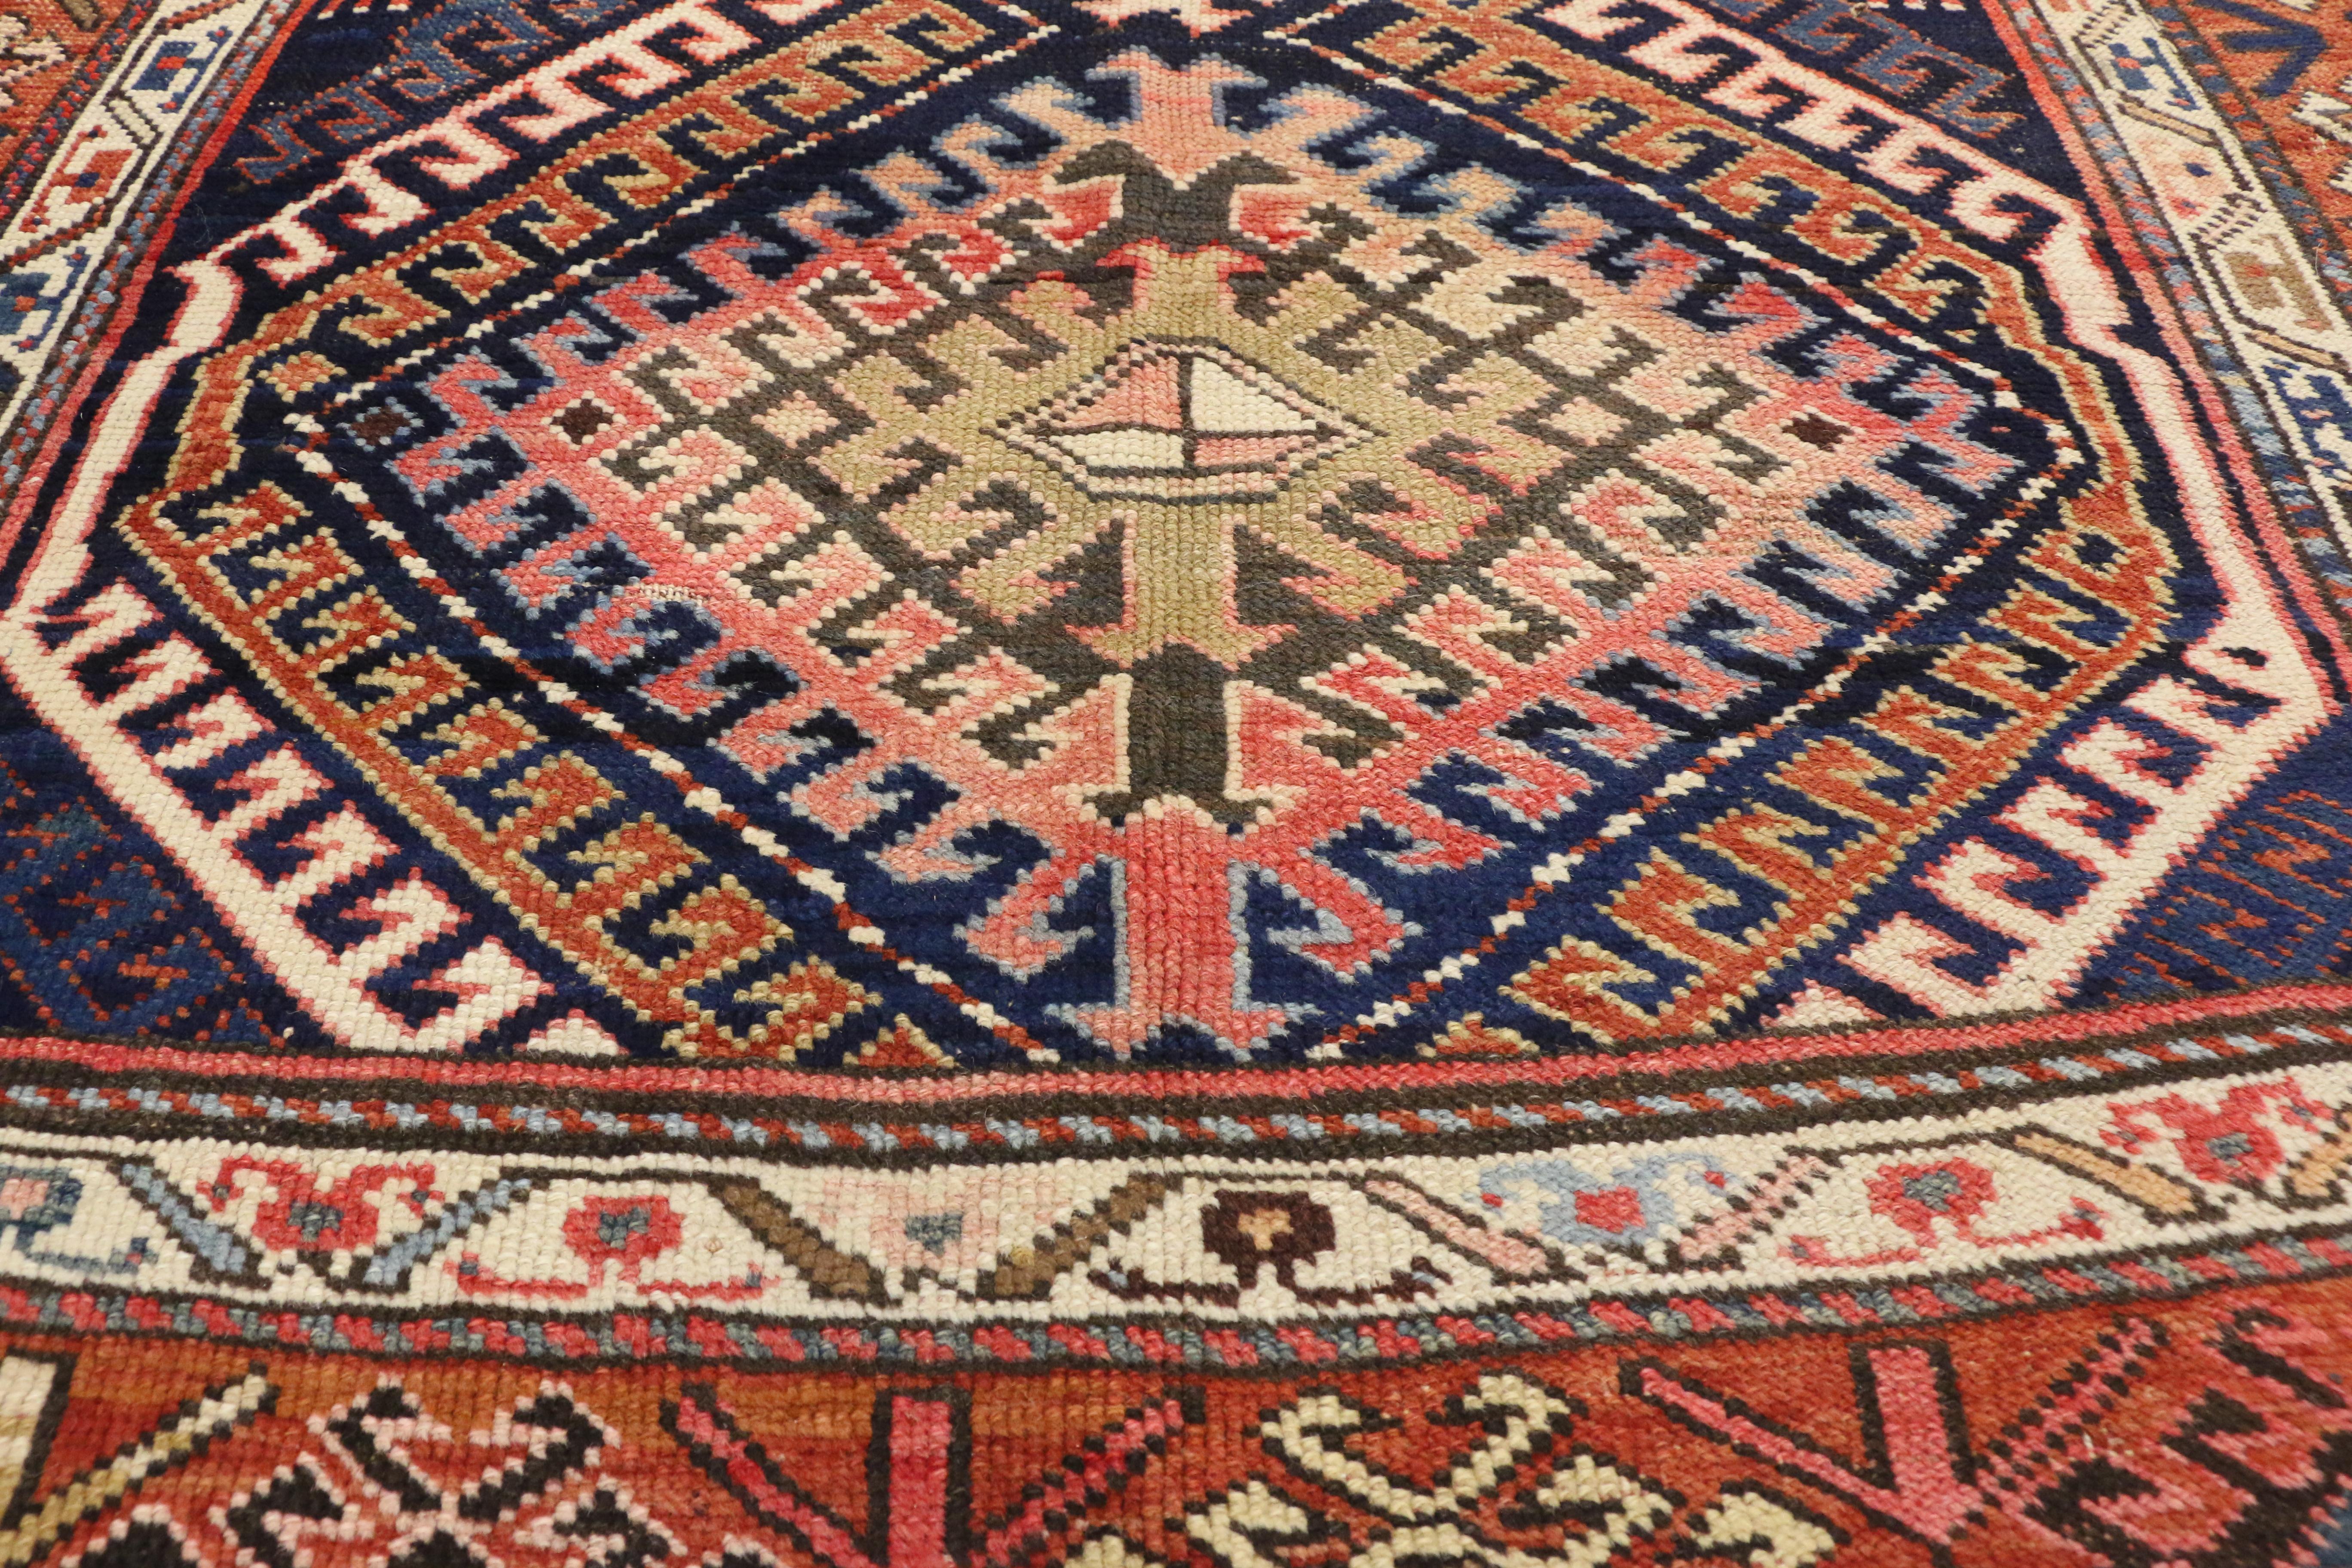 Rustic Tribal Style Antique Caucasian Bordjalou Kazak Rug, Wide Hallway Runner In Distressed Condition For Sale In Dallas, TX